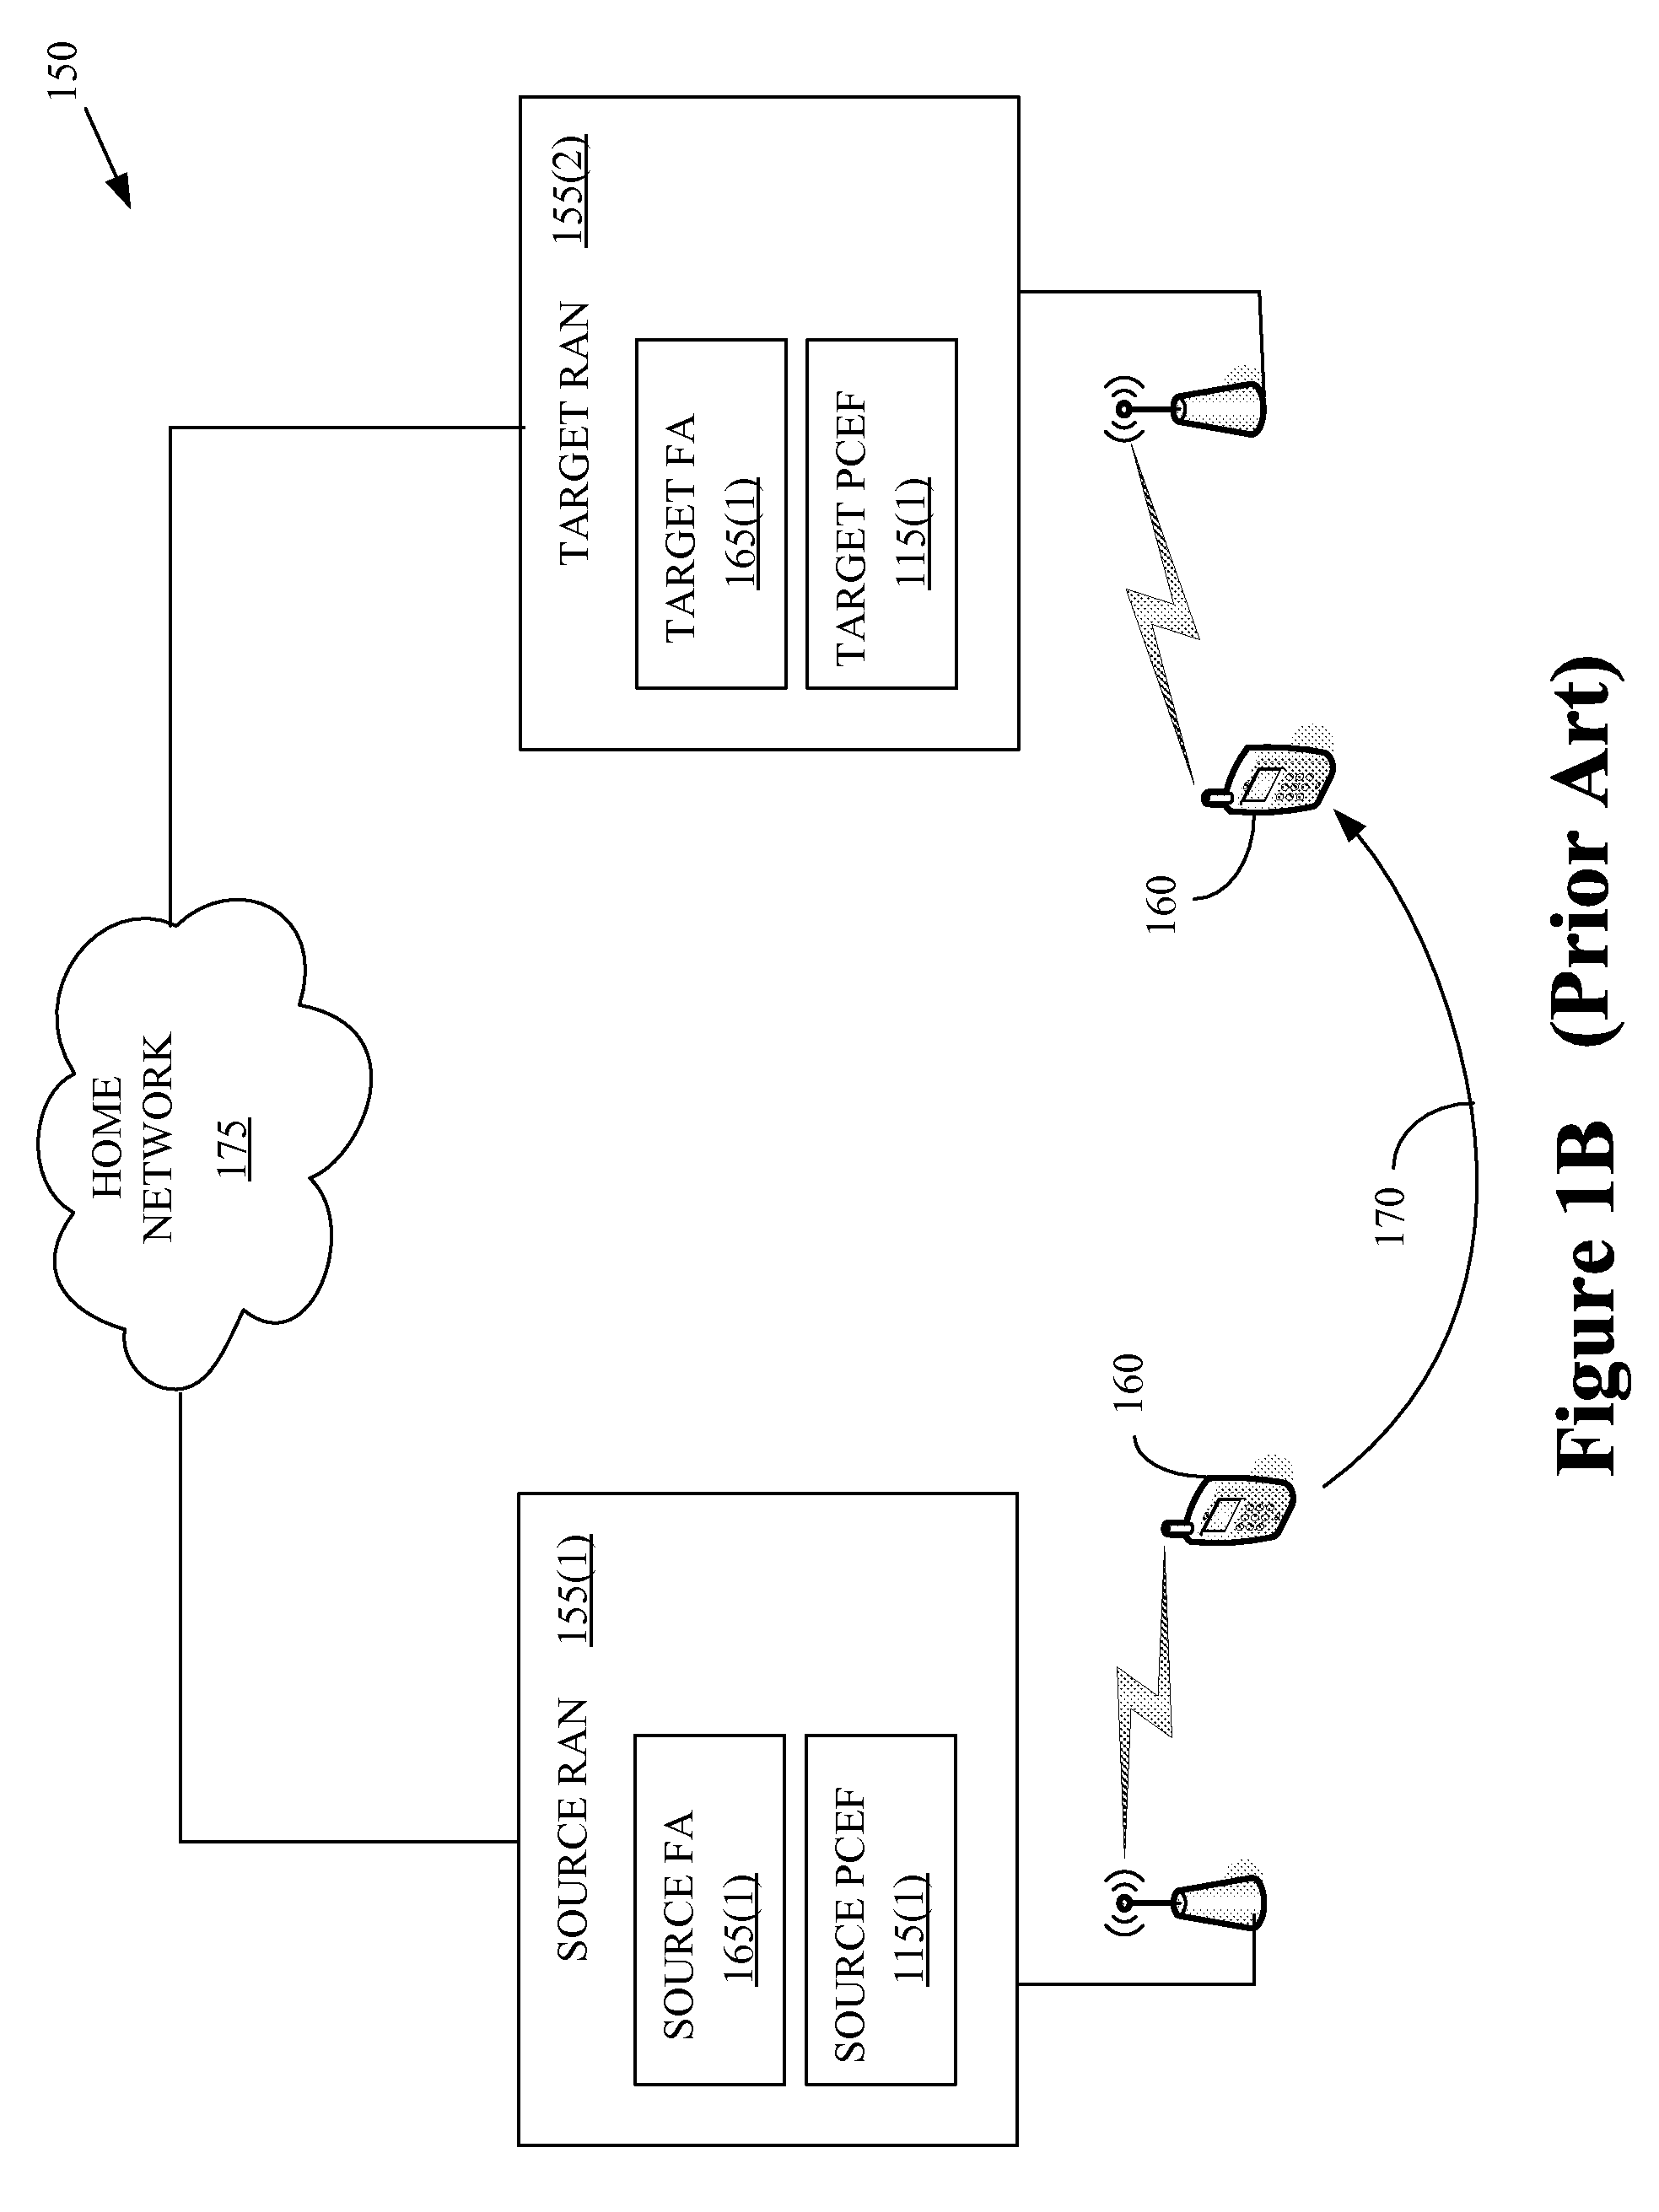 Mobility Aware Policy and Charging Control in a Wireless Communication Network